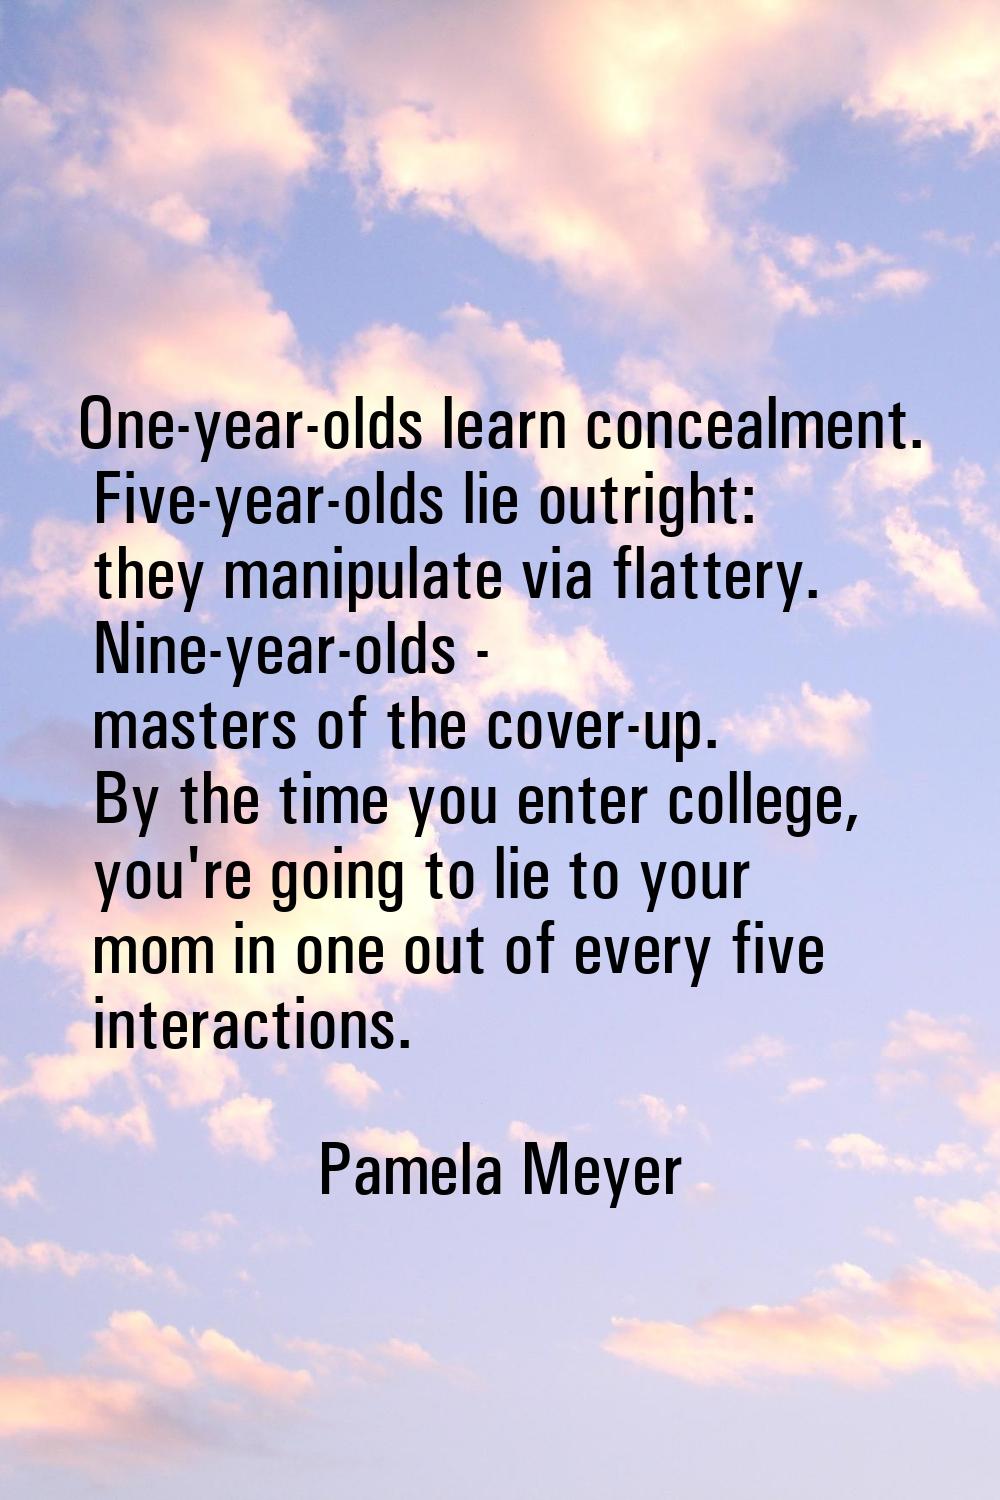 One-year-olds learn concealment. Five-year-olds lie outright: they manipulate via flattery. Nine-ye